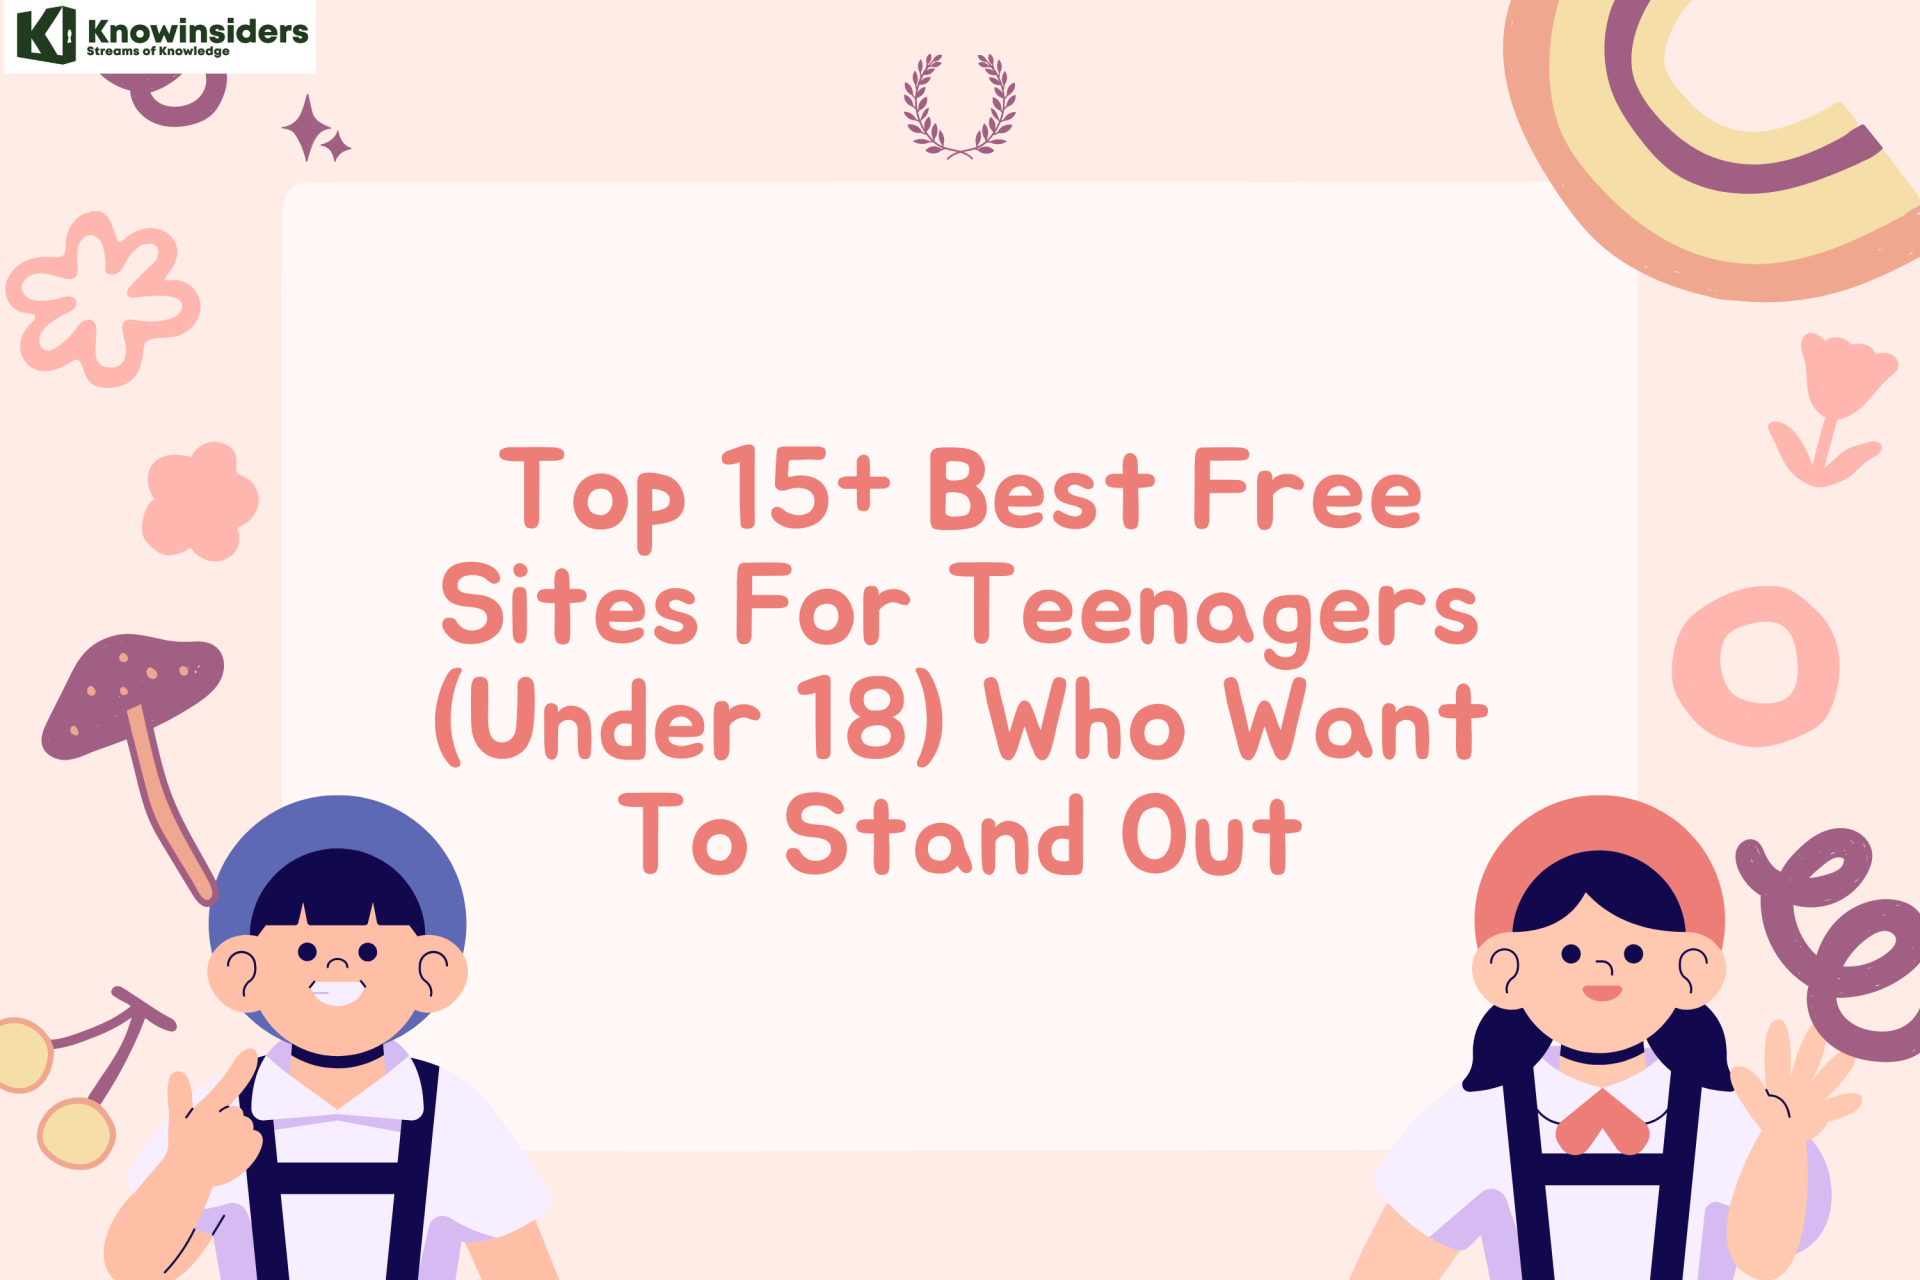 Top 15+ Best Free Sites For Teenagers (Under 18) Who Want To Stand Out